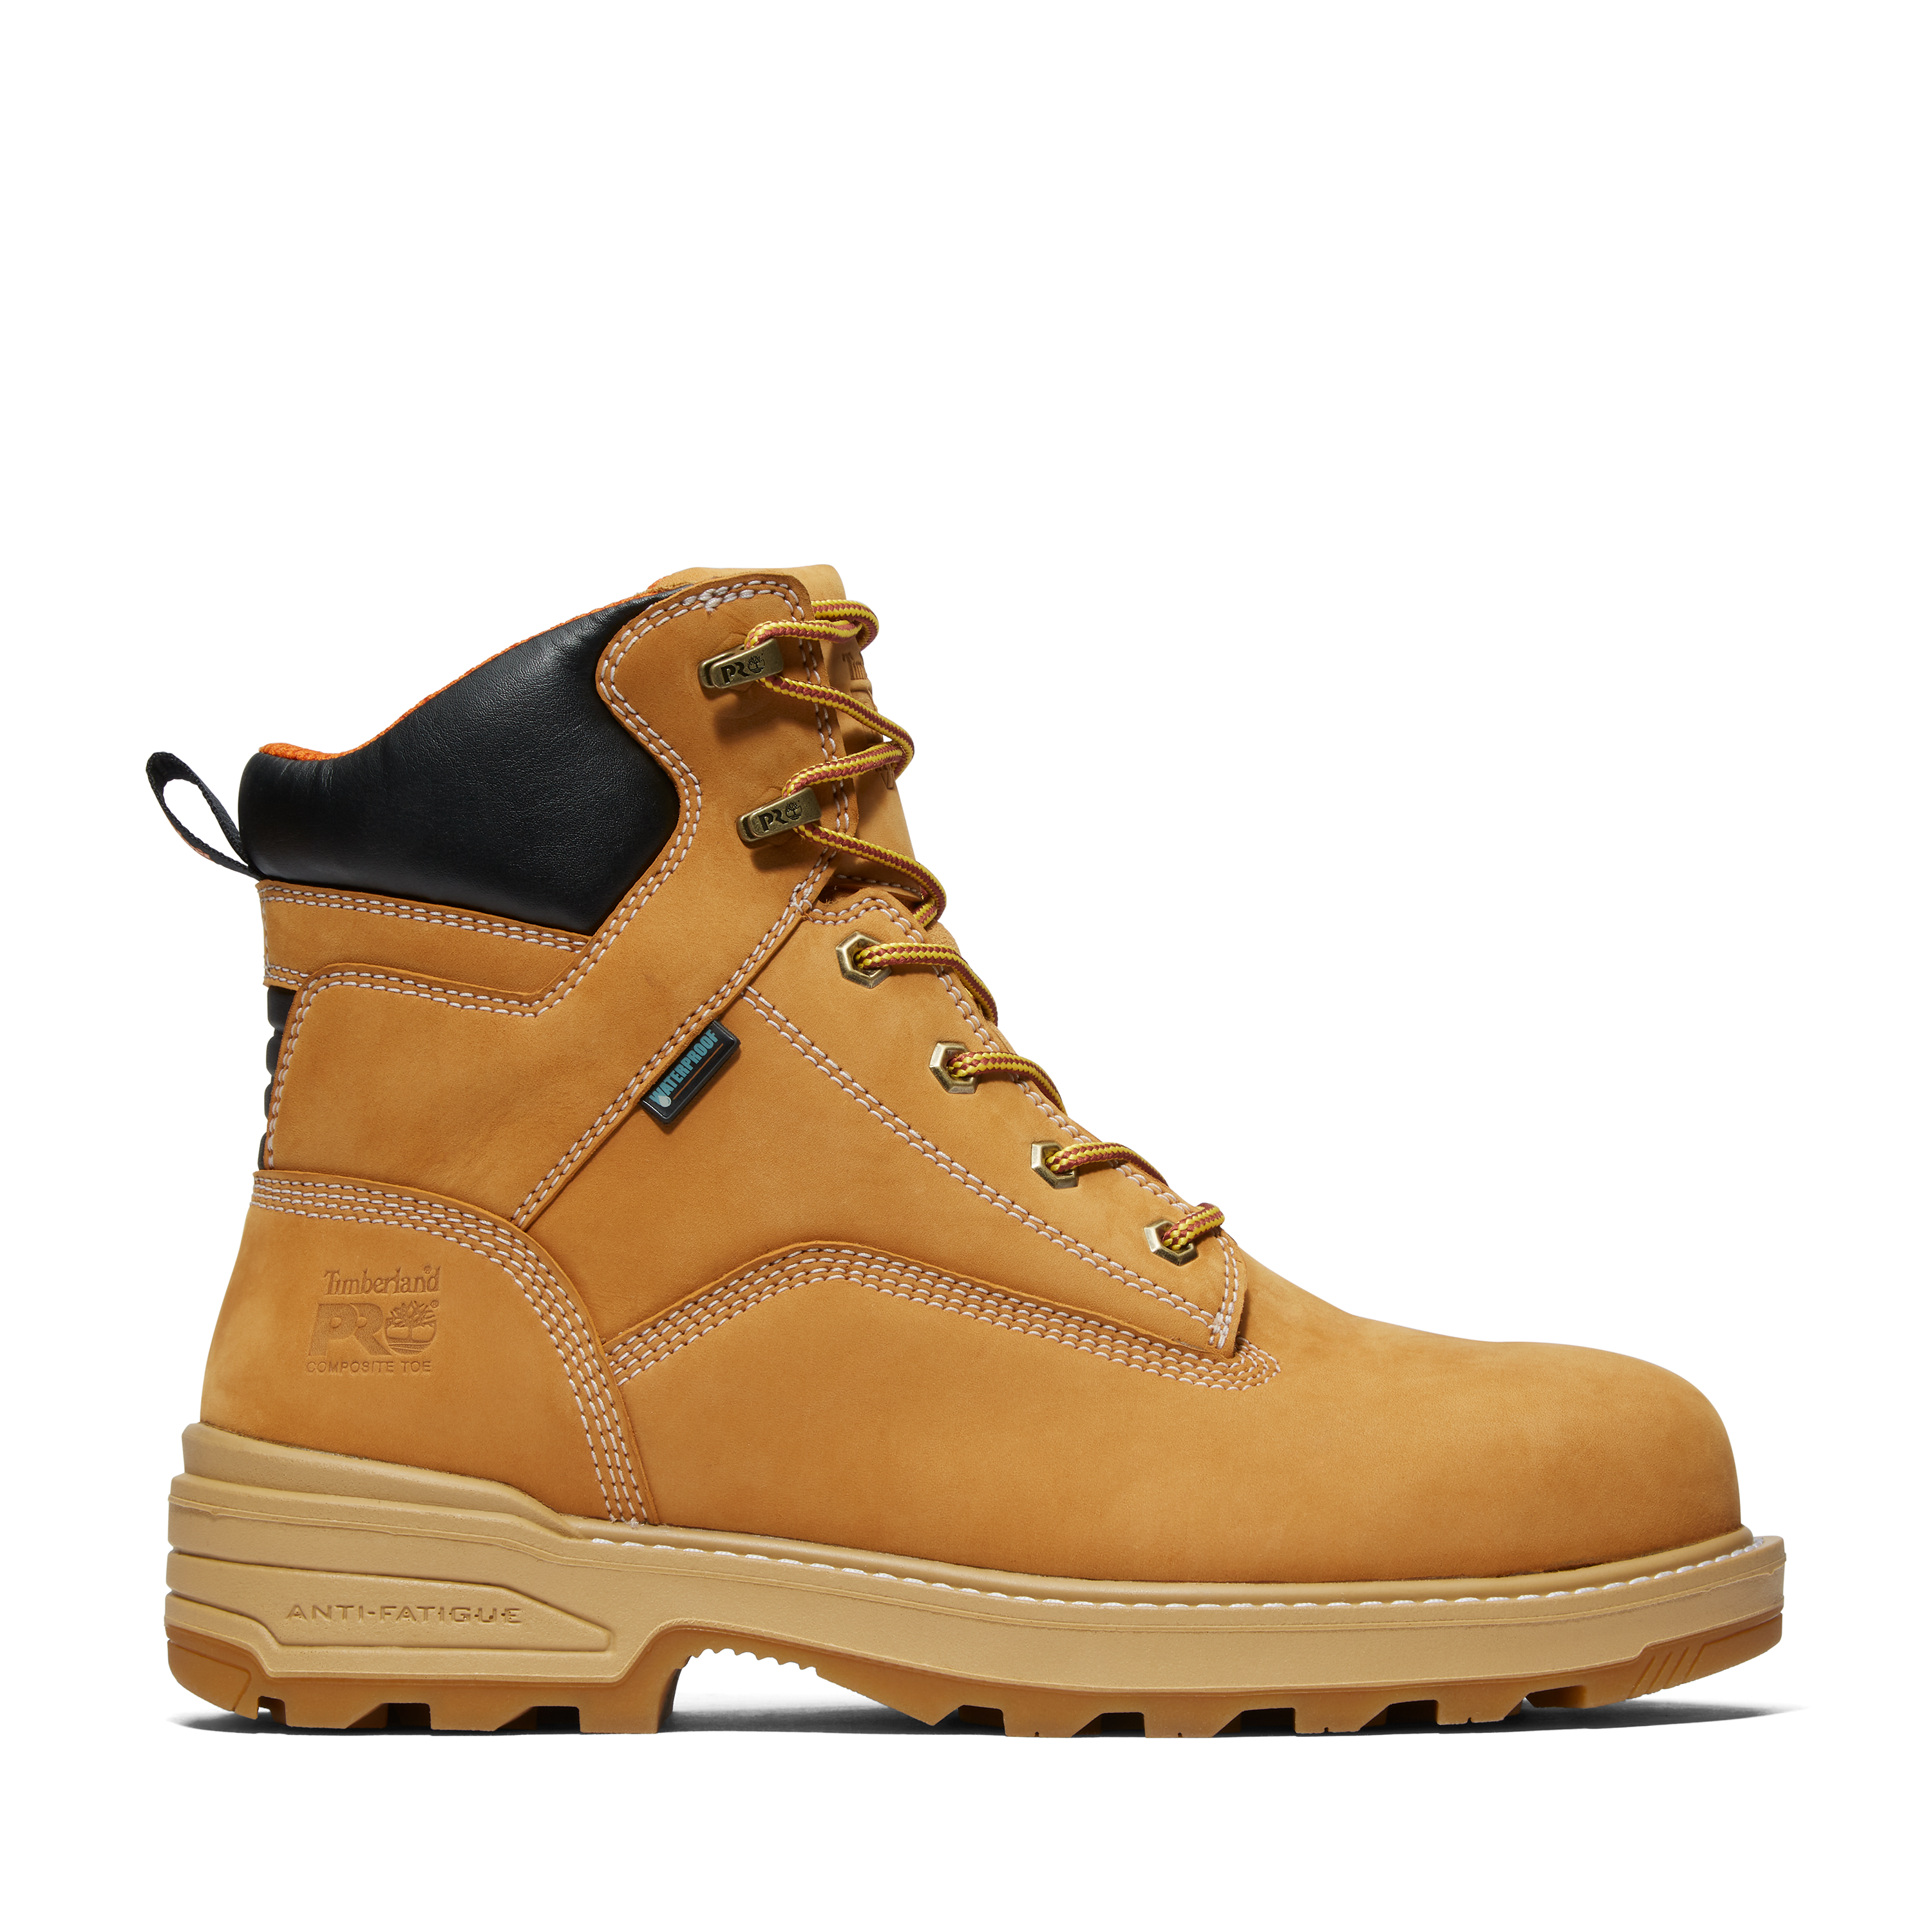 Timberland Pro Resistor 6" Composite Toe Insulated / Waterproof - Wide - Mens